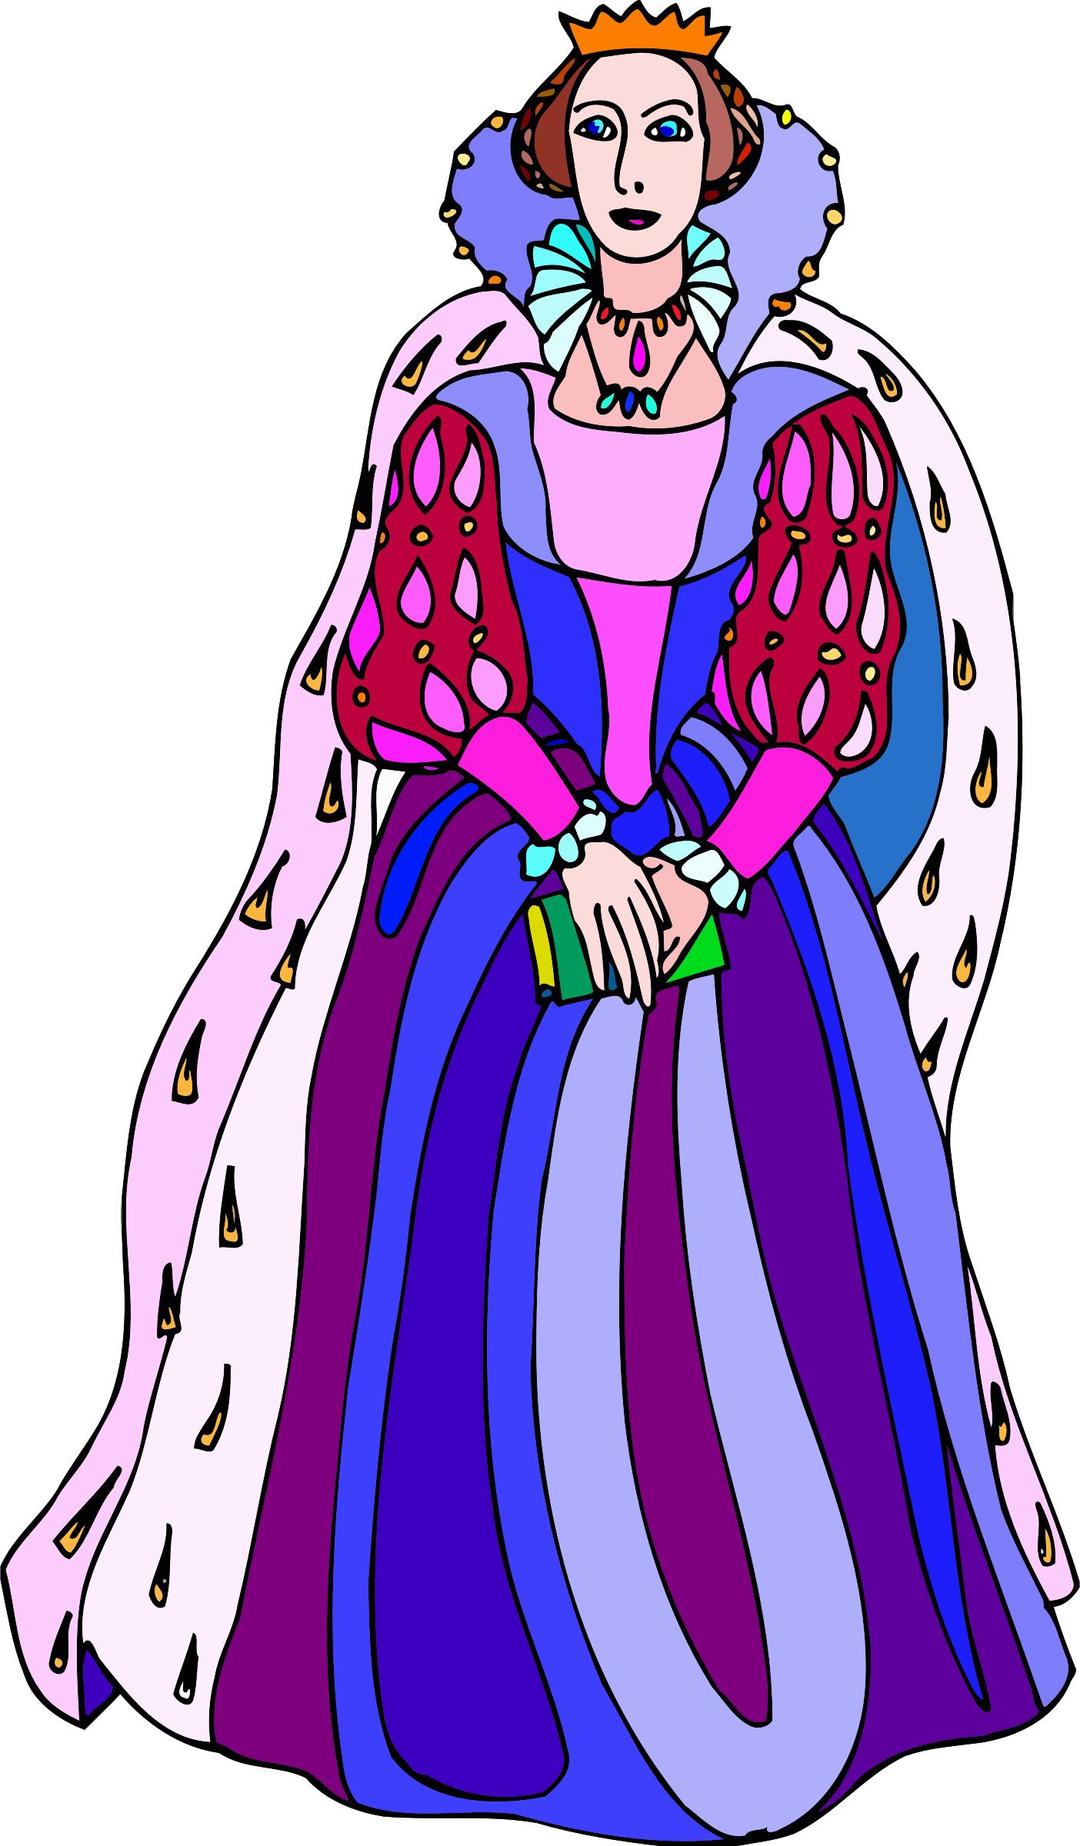 Shakespeare characters - queen 2 (colour) png transparent